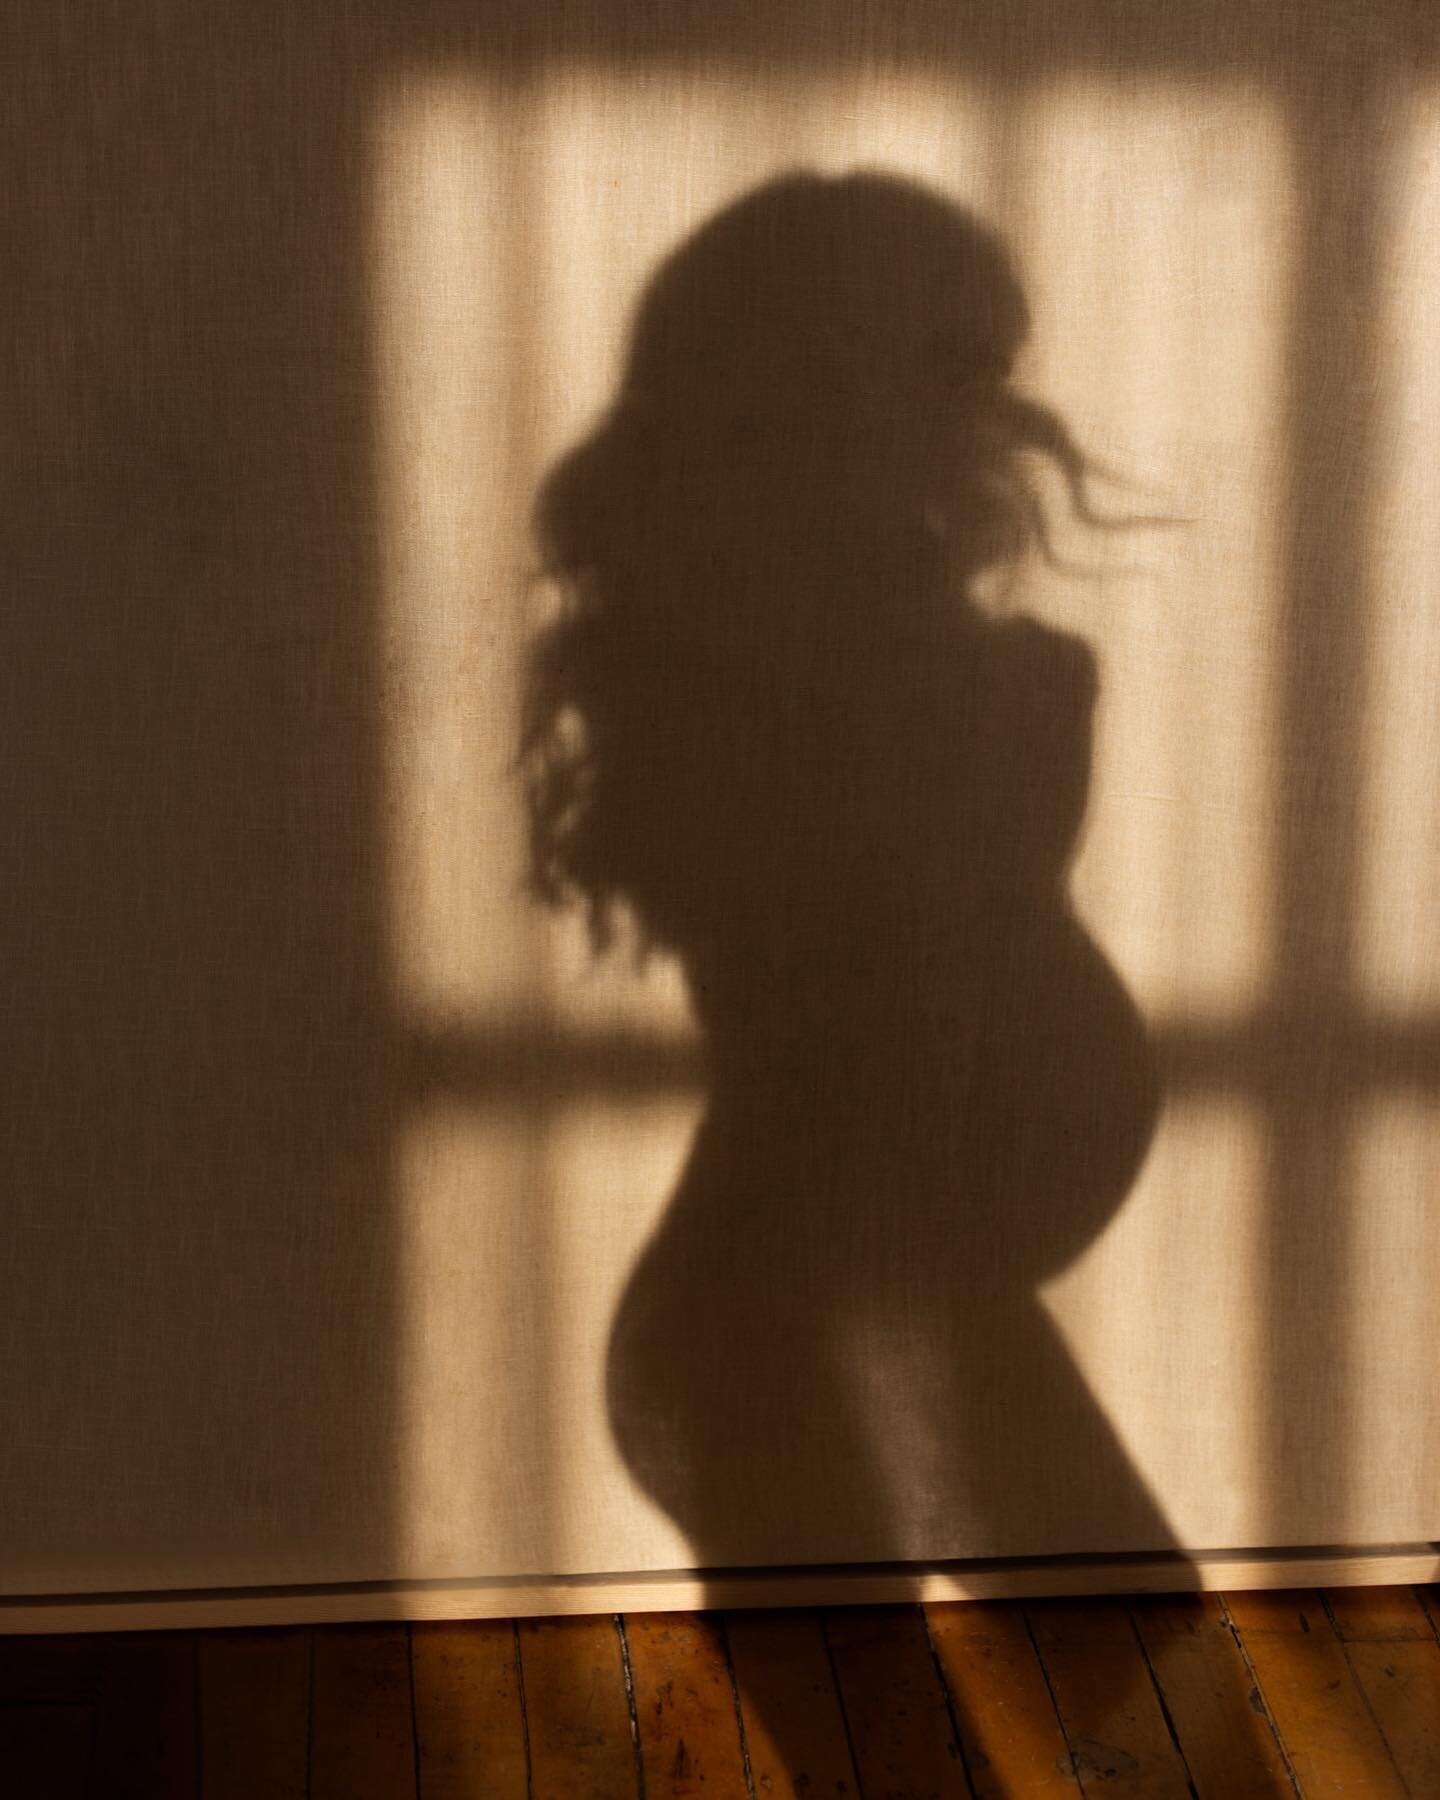 When the sun blesses you on your shoot day〰️female forme shadow play heavennnn✨😍✨

#mothermusemag#motherhood#maternityphotography#editorialmaternity#torontophotographer#torontomaternityphotographer#montrealmaternityphotographer#montrealmaternityphot